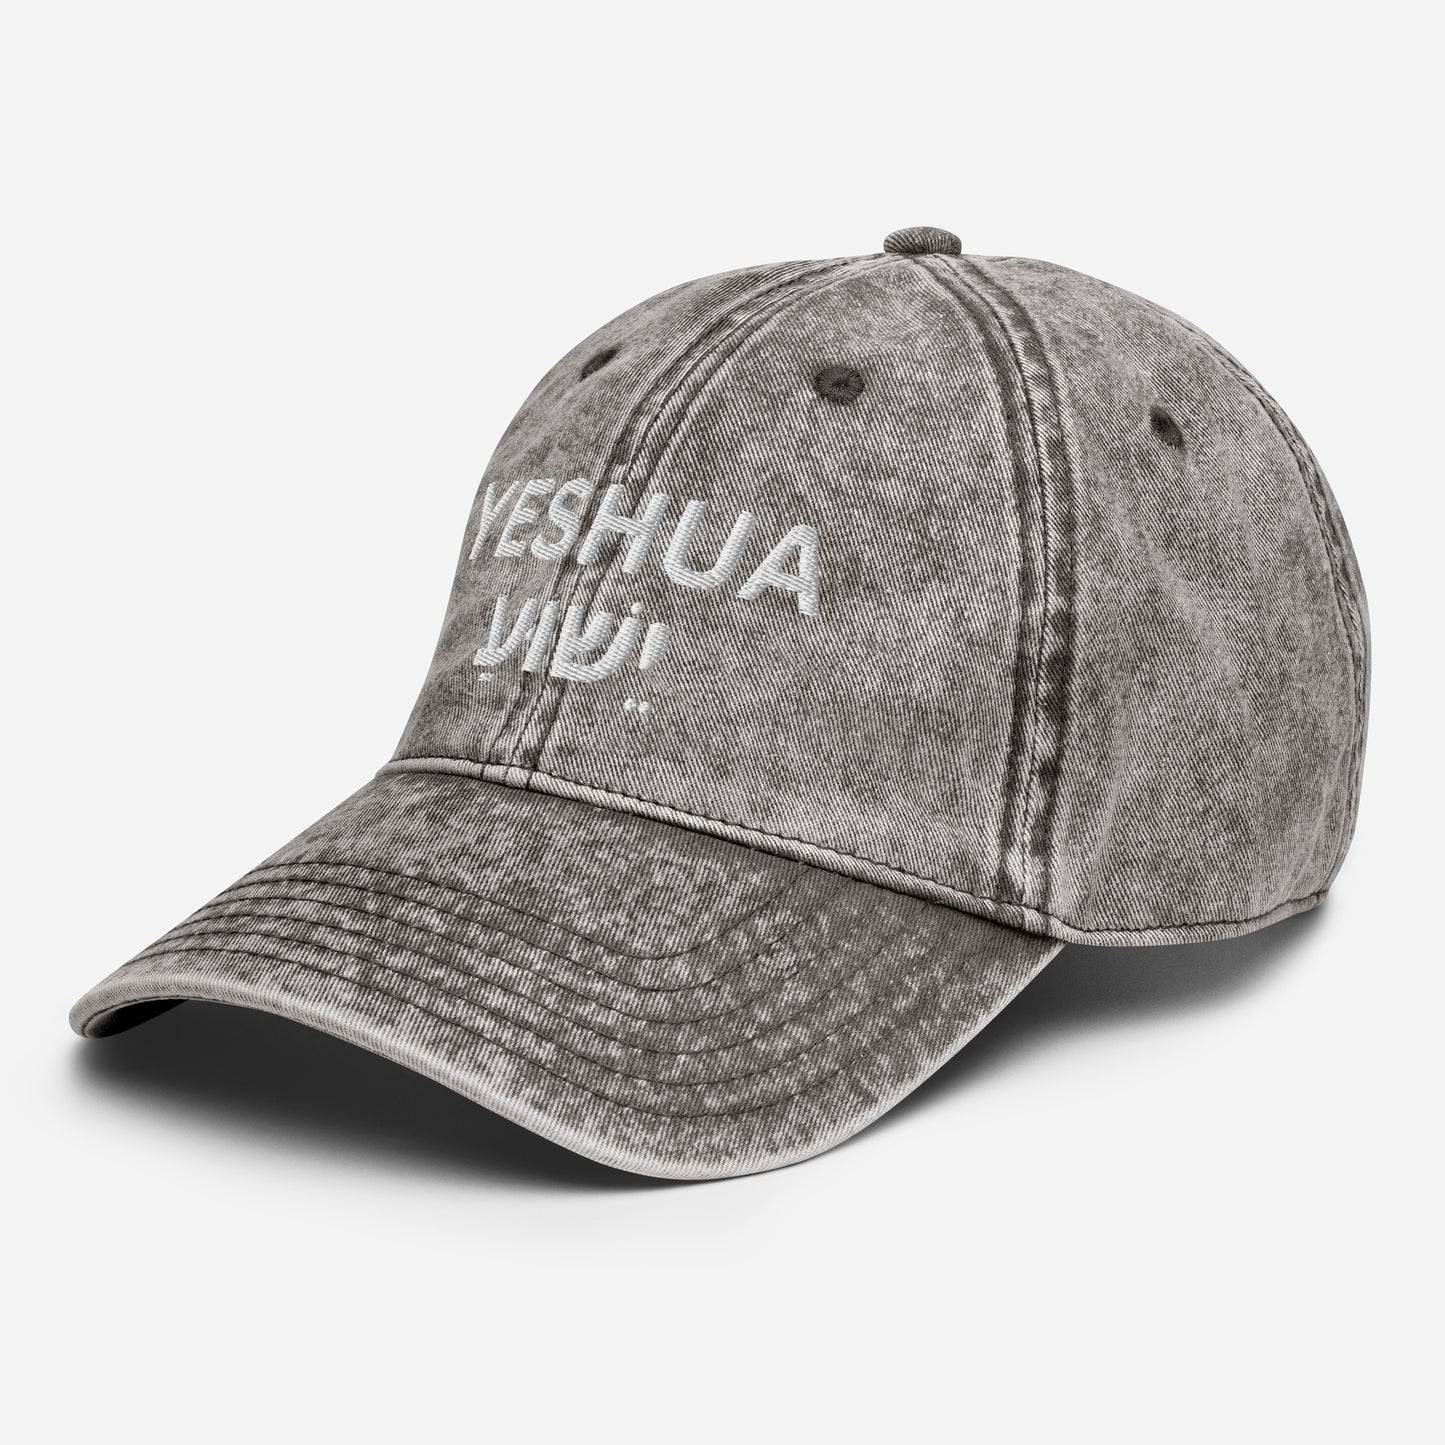 Vintage Cotton Twill "Yeshua" Embroidered Cap - Humble & Faithful Co.